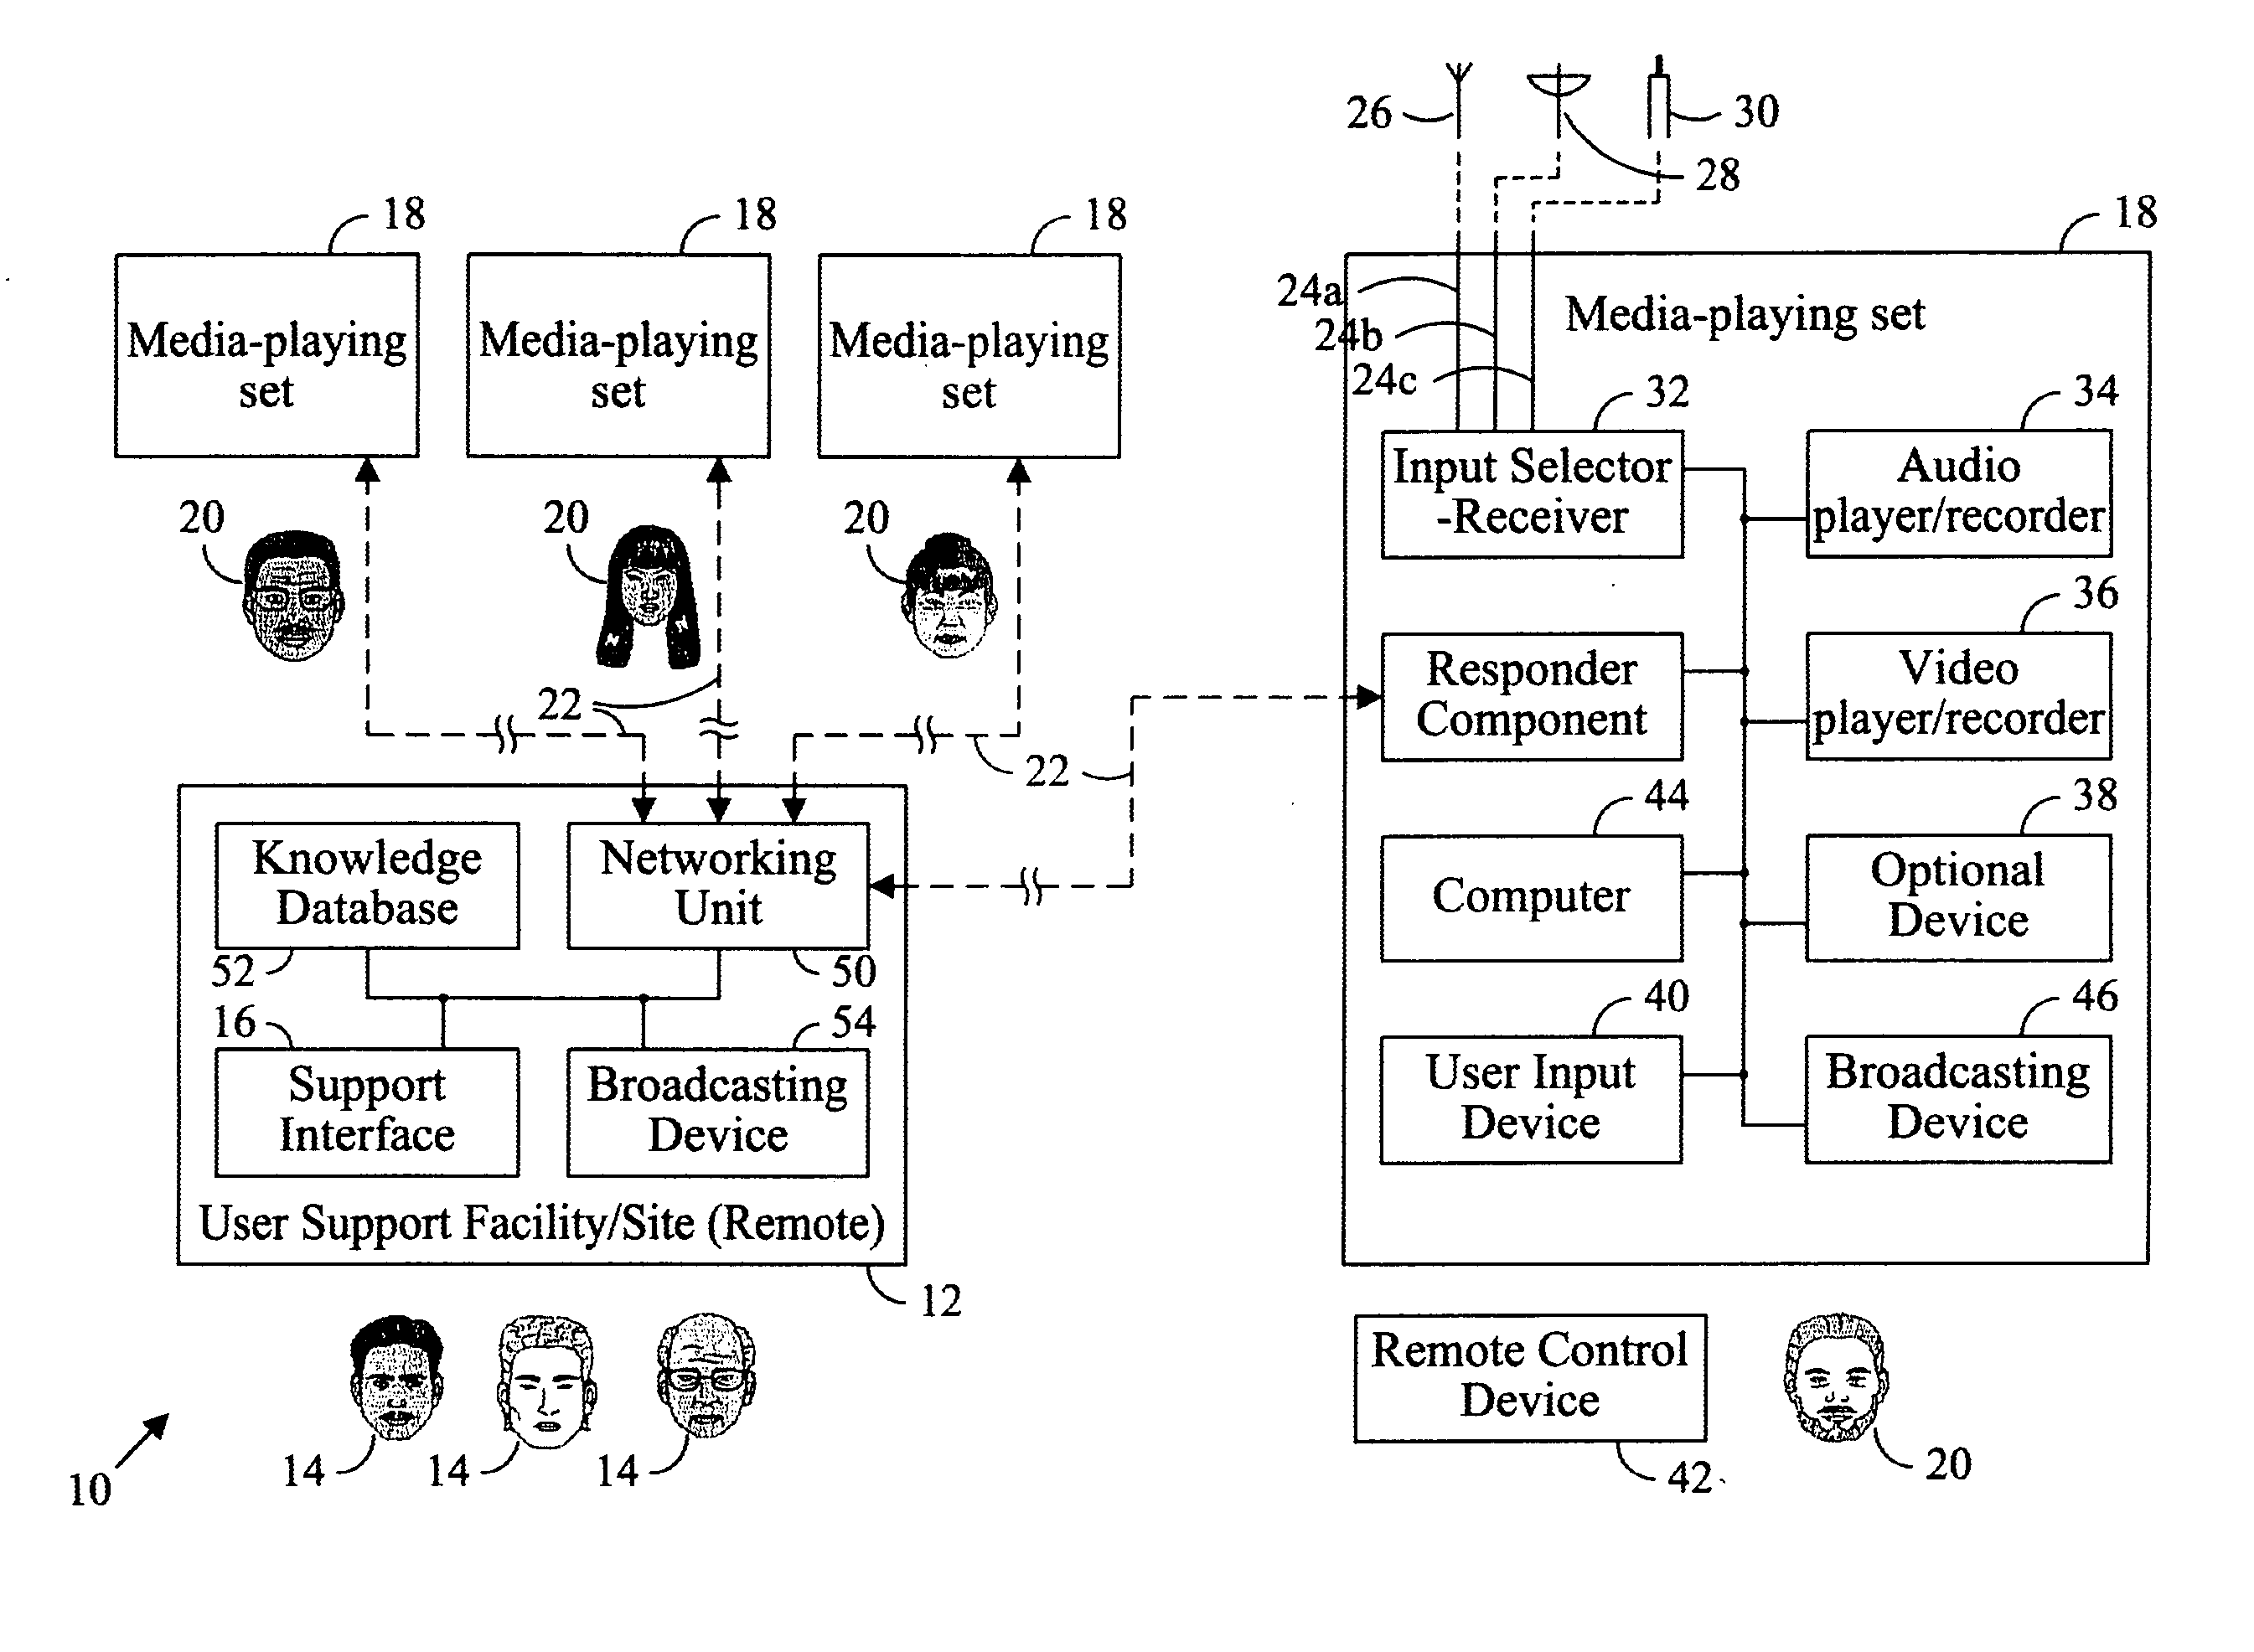 Method for configuring media-playing sets